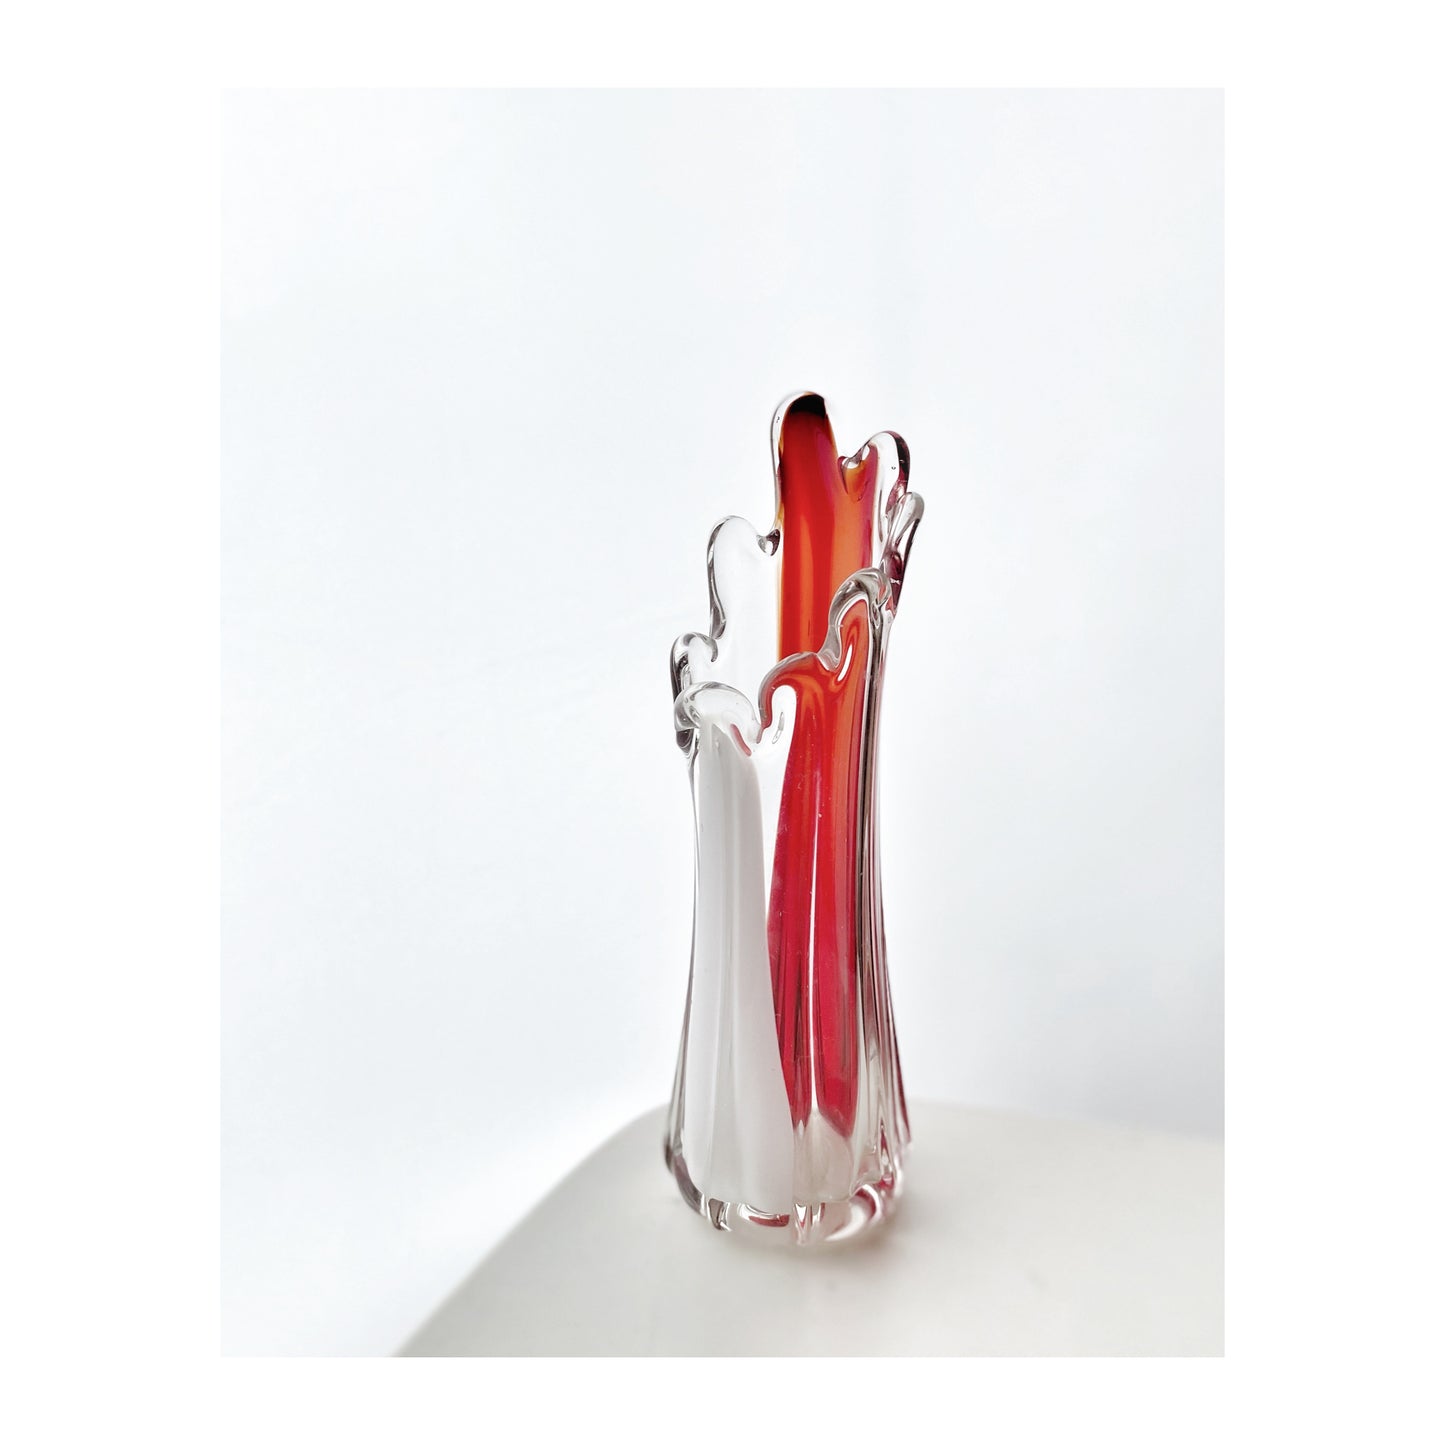 A Murano Art Glass vase, organic form, clear with white, and red tint